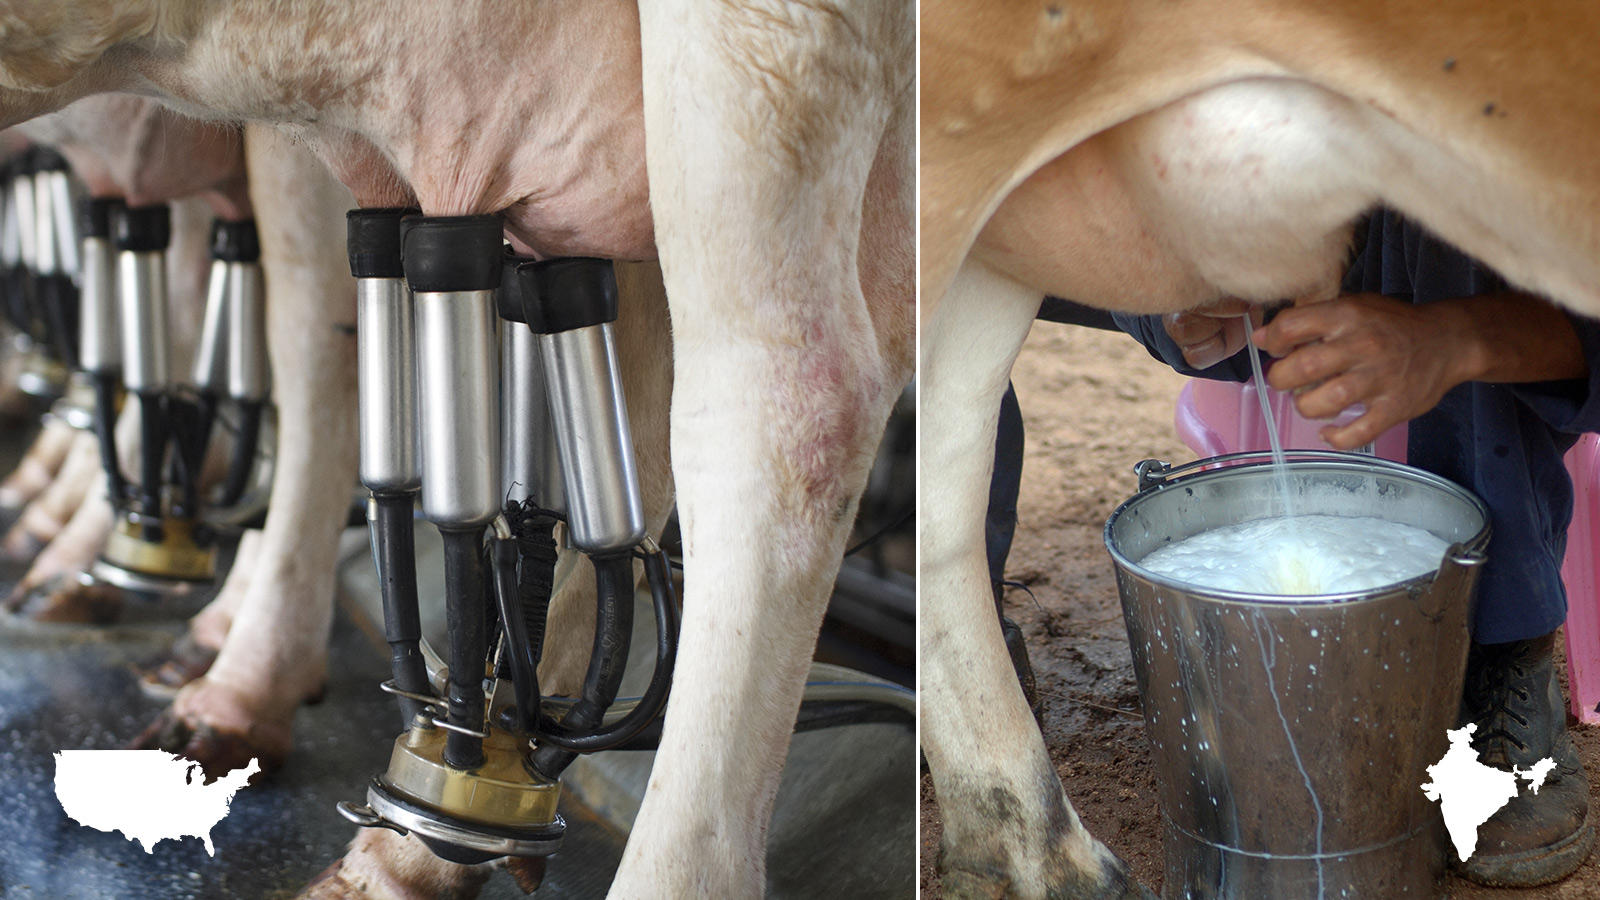 Left: A North American dairy. Right: Man milking a cow in South India